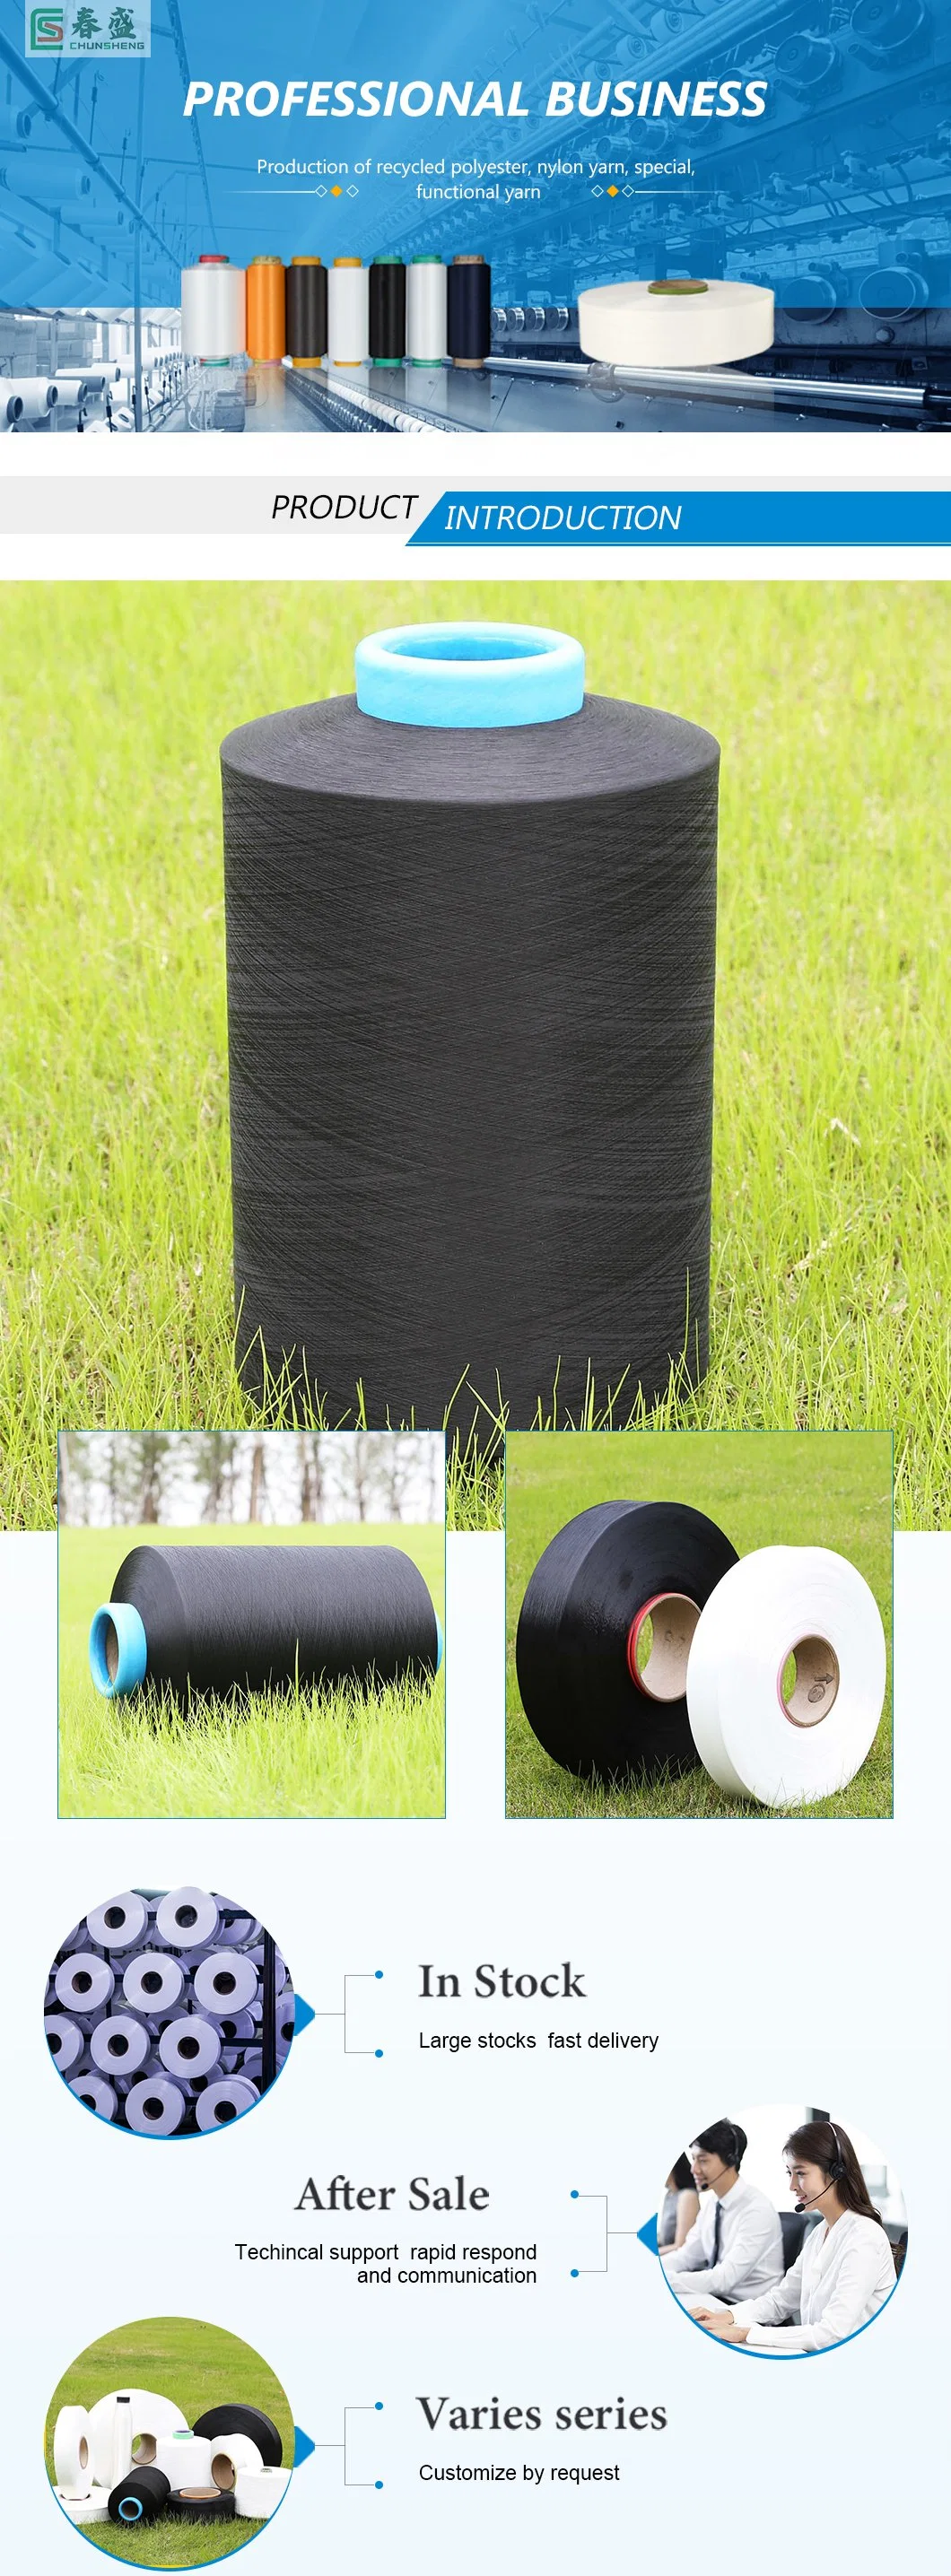 China Manufacturer of Grs Certificated Elastic Polyester Yarns in Recycled Sph